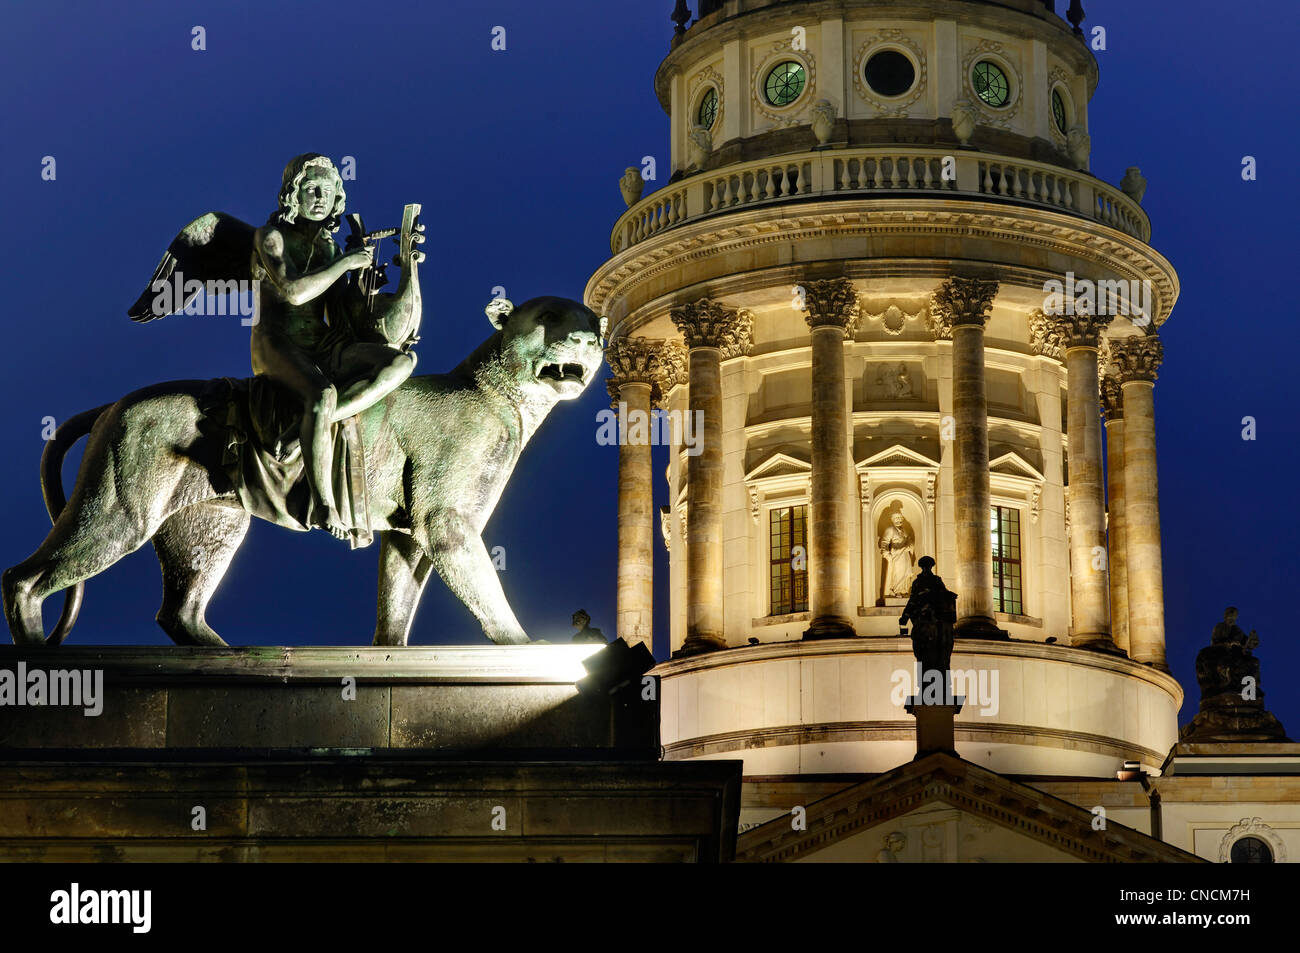 The dome of the French Cathedral on Gendarmenmarkt in Berlin at night Stock Photo